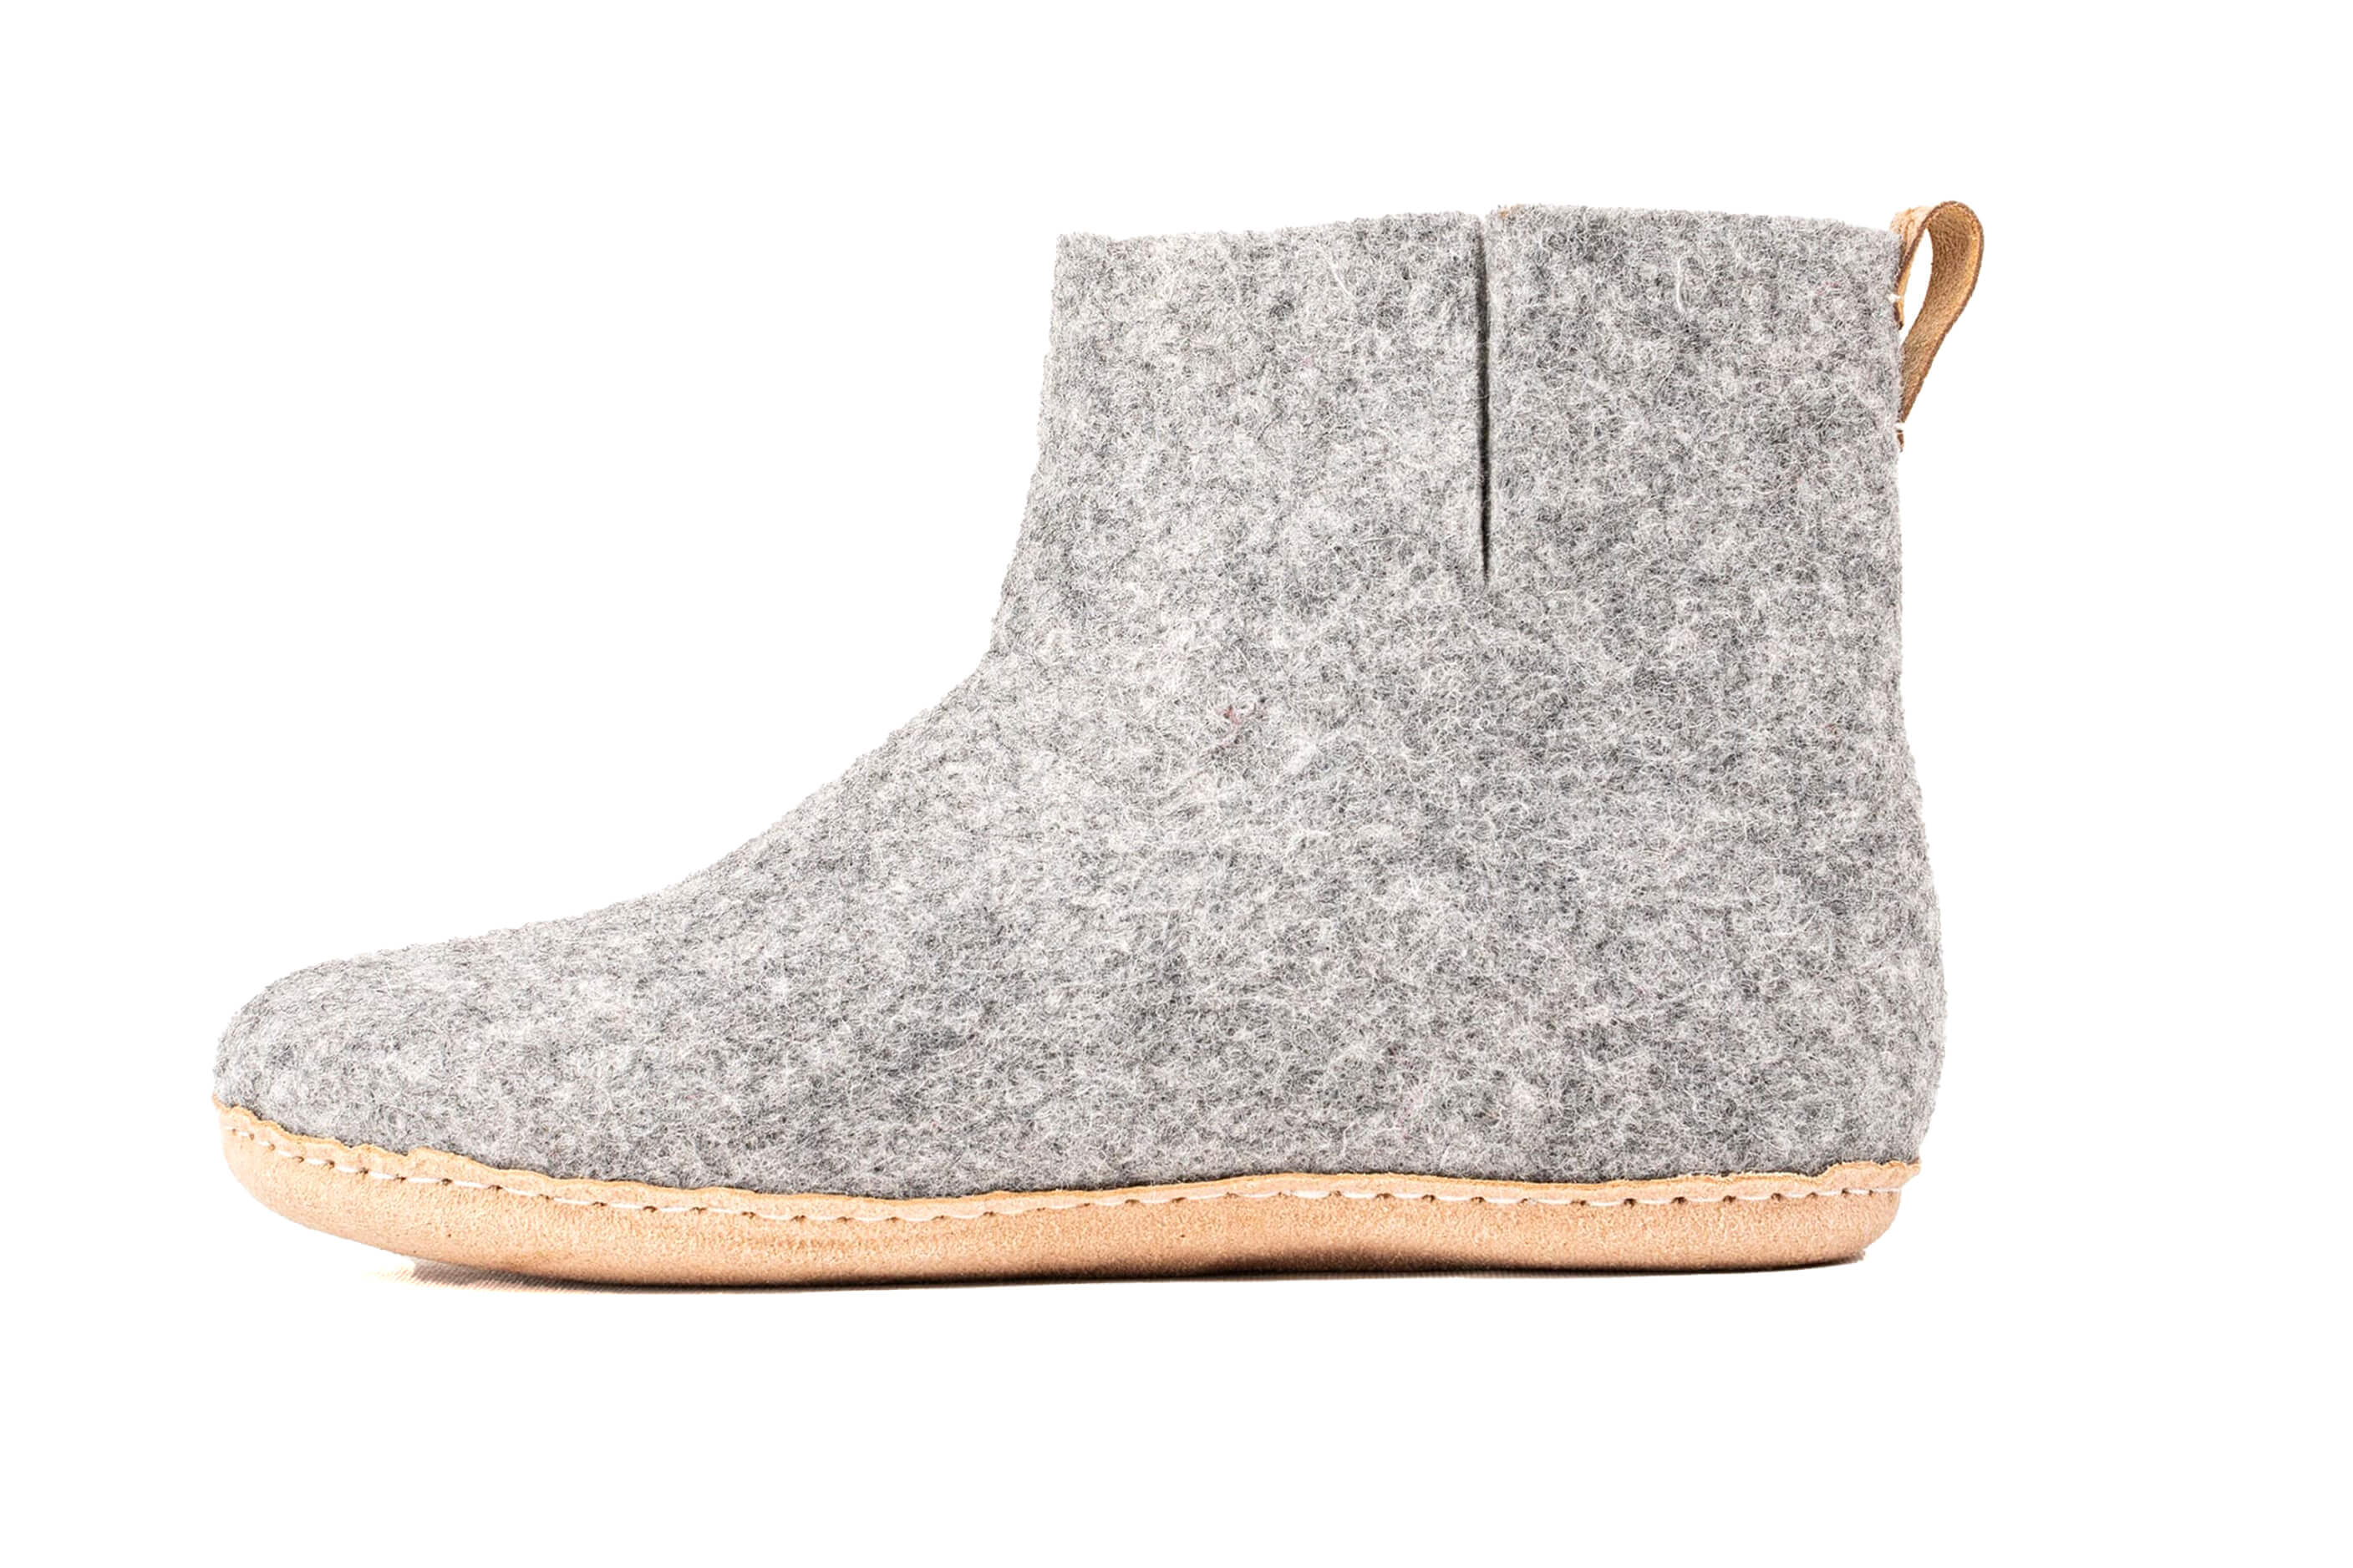 Indoor Boots With Leather Sole - Natural Grey